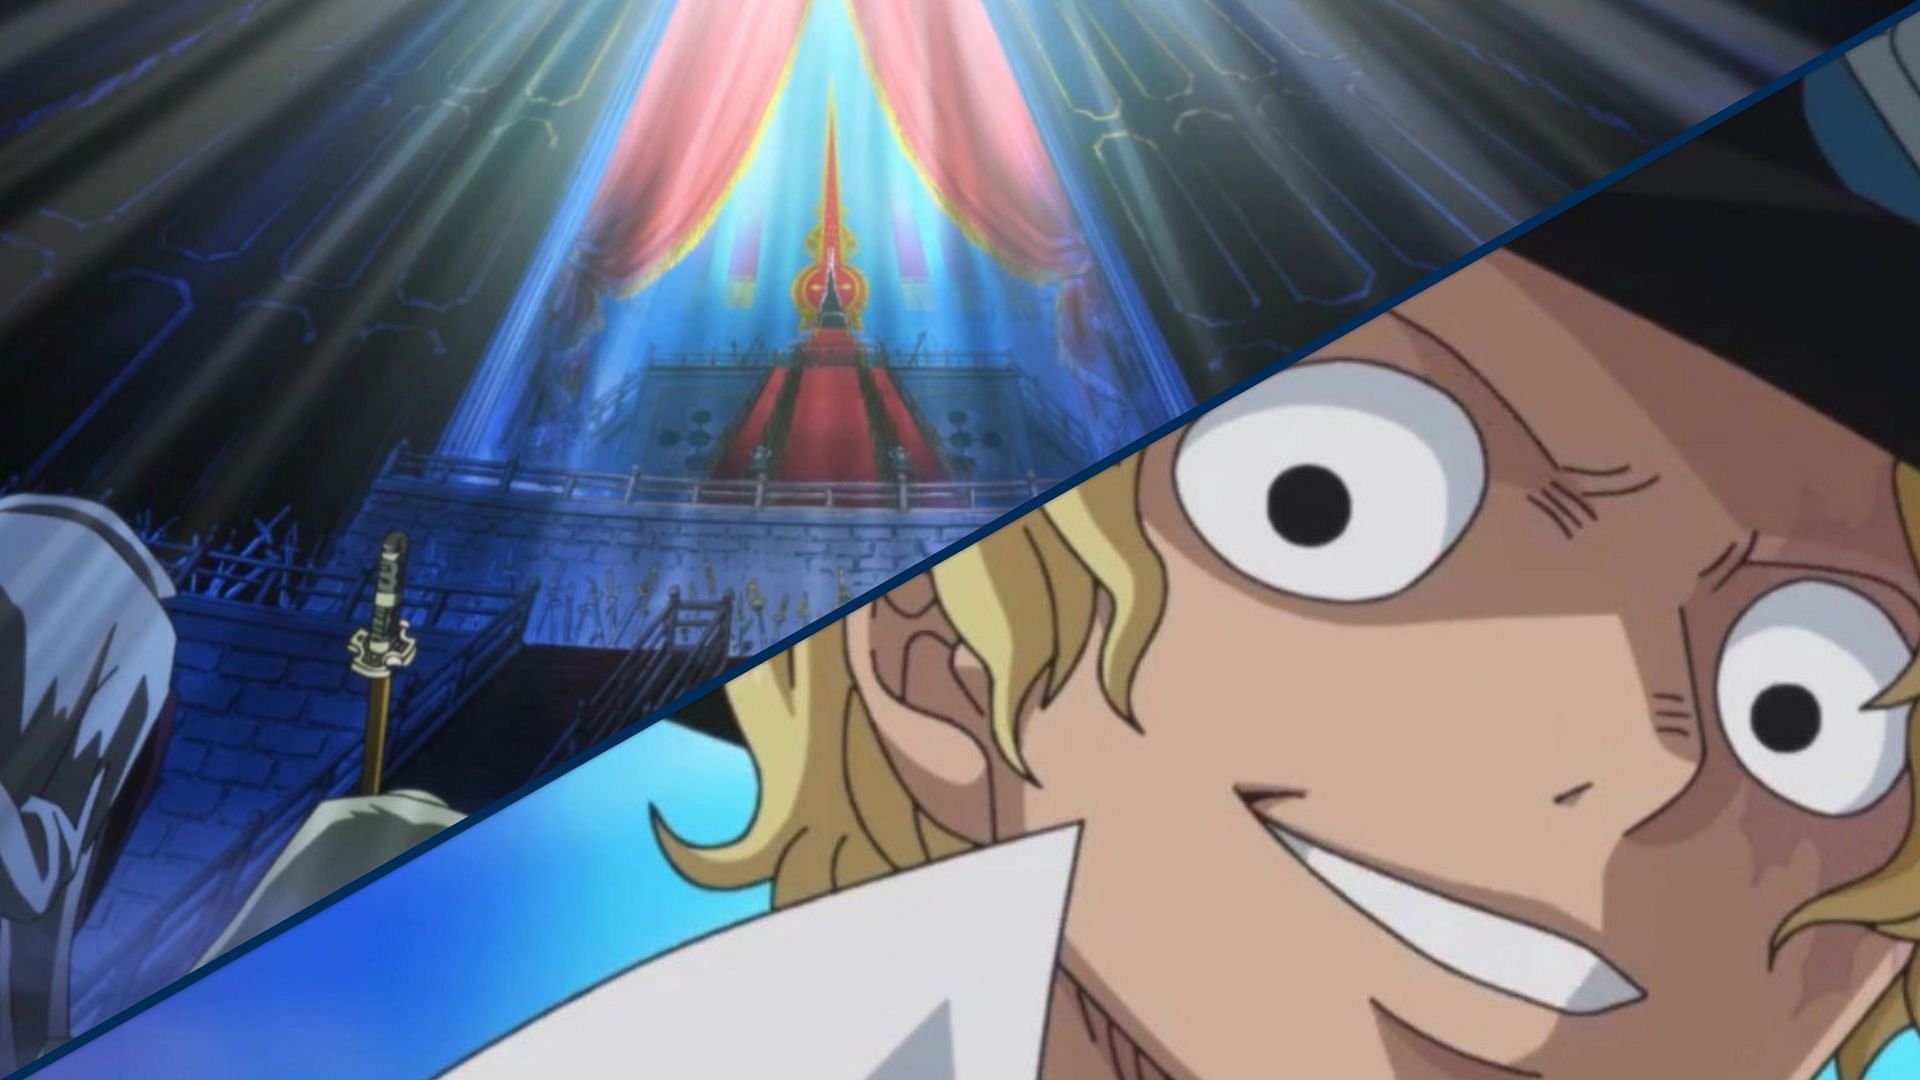 One Piece 1058 Review: Sabo Disappear? -  - News for Millennials